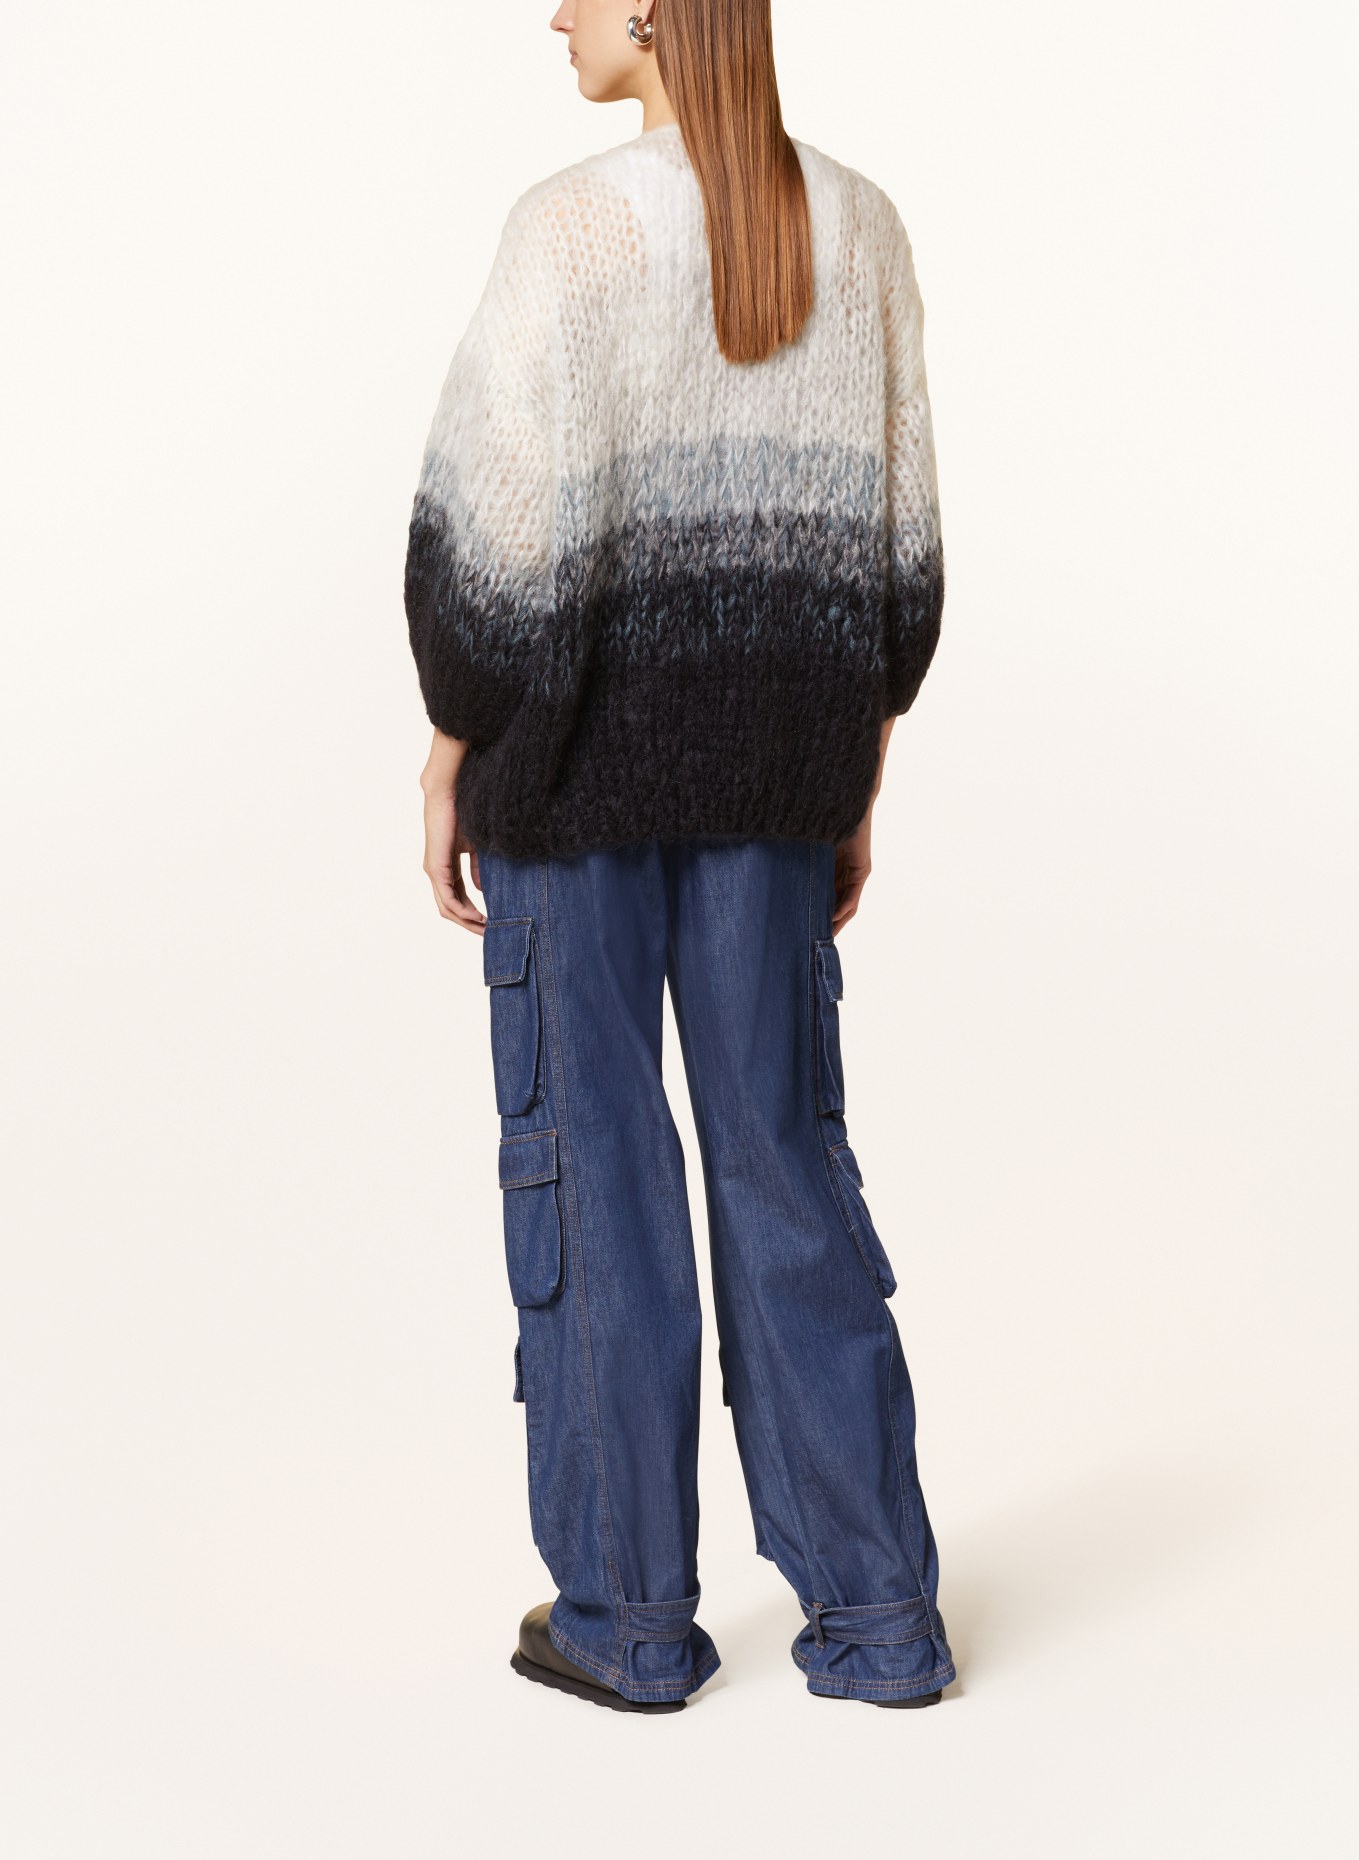 MAIAMI Oversized knit cardigan made of mohair, Color: WHITE/ BLACK/ TEAL (Image 3)